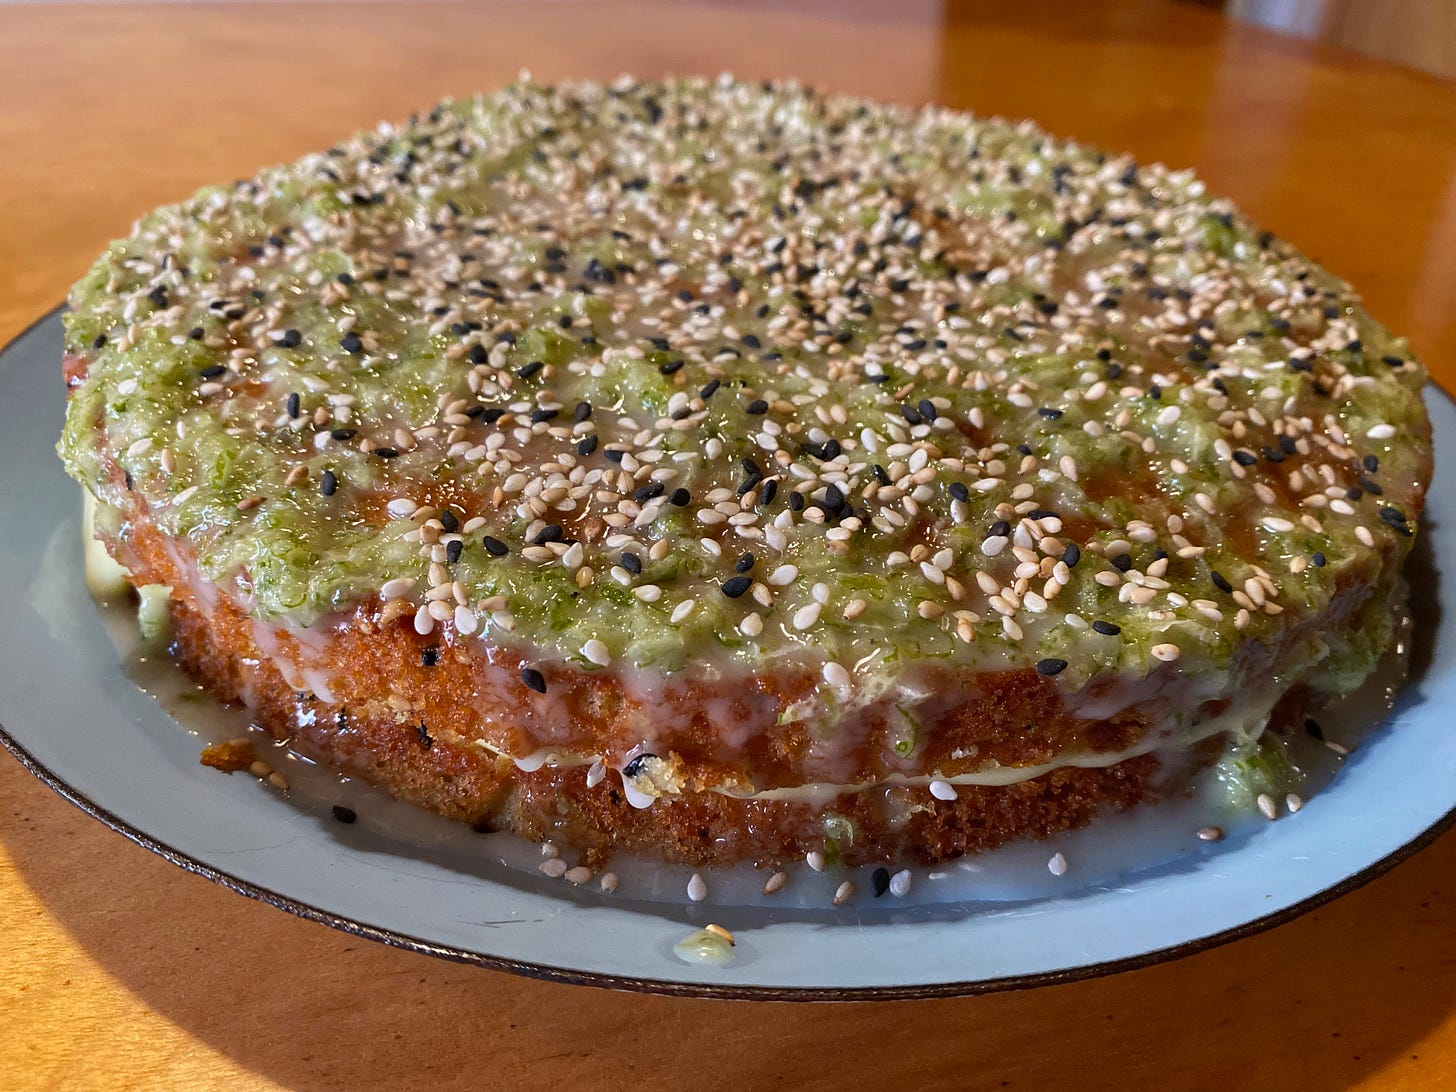 Closeup of a round sandwich cake on a blue plate. The top is covered thin glaze, bright green lime zest, and lots of black and white sesame seeds.